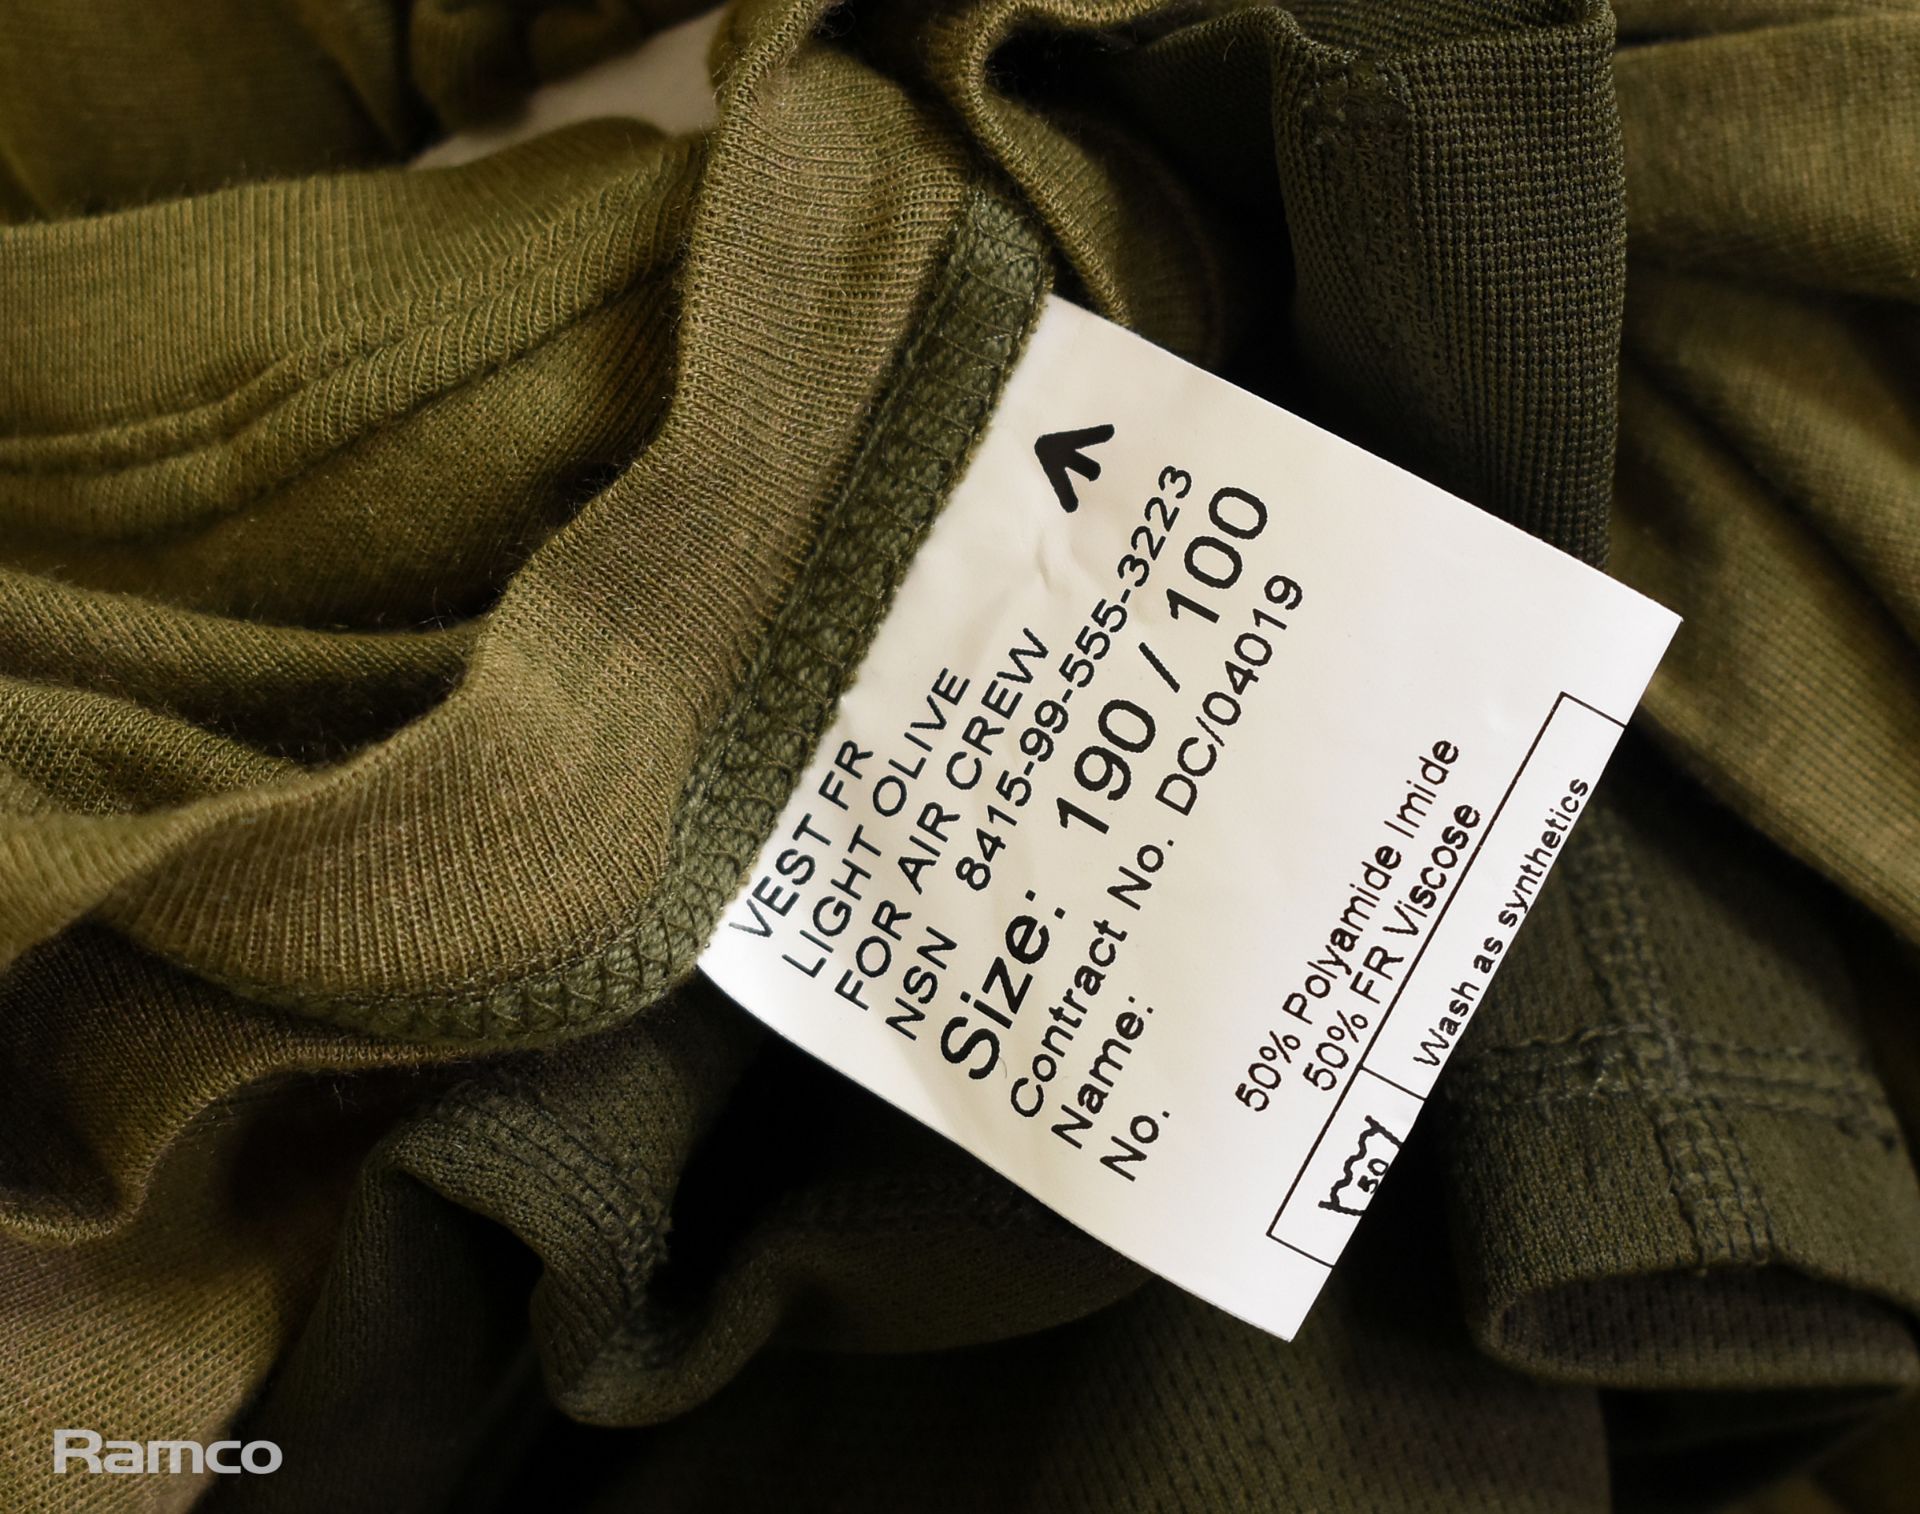 50x British Army thermal underwear Air crew long sleeved vests - mixed colours - mixed grades - Image 5 of 5